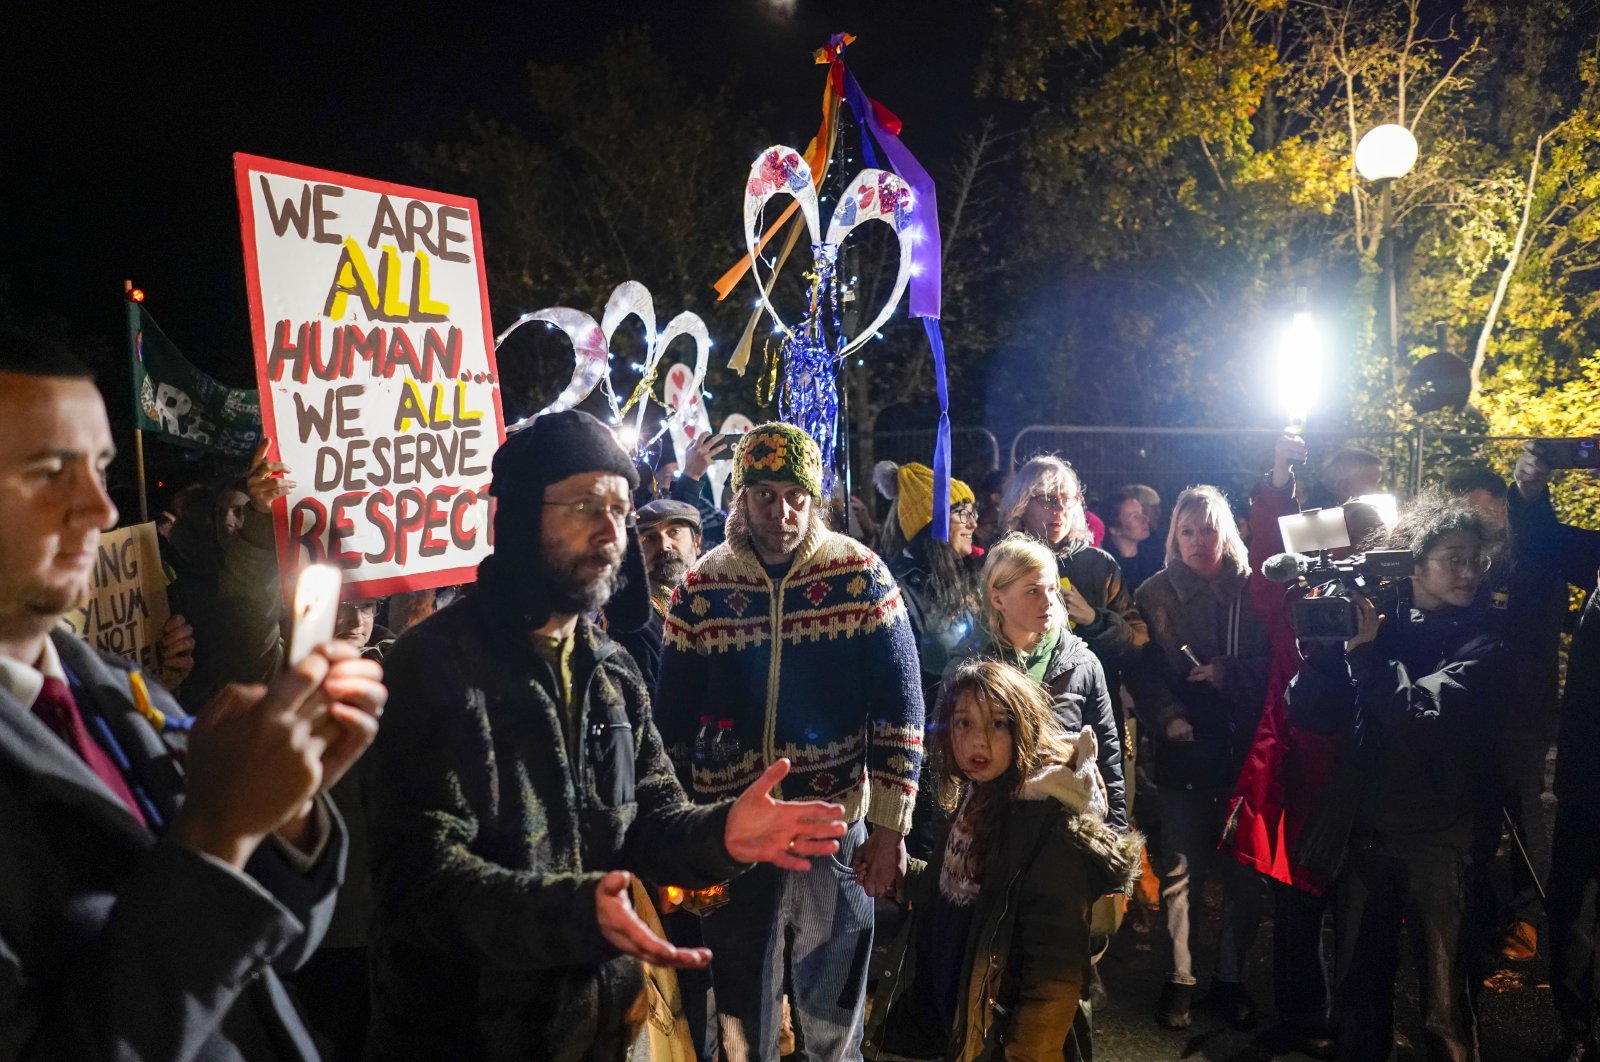 People hold lights and placards, in a show of support for migrants being detained inside the Manston immigration short-term holding facility, Kent, England, Nov. 2, 2022. (AP Photo)